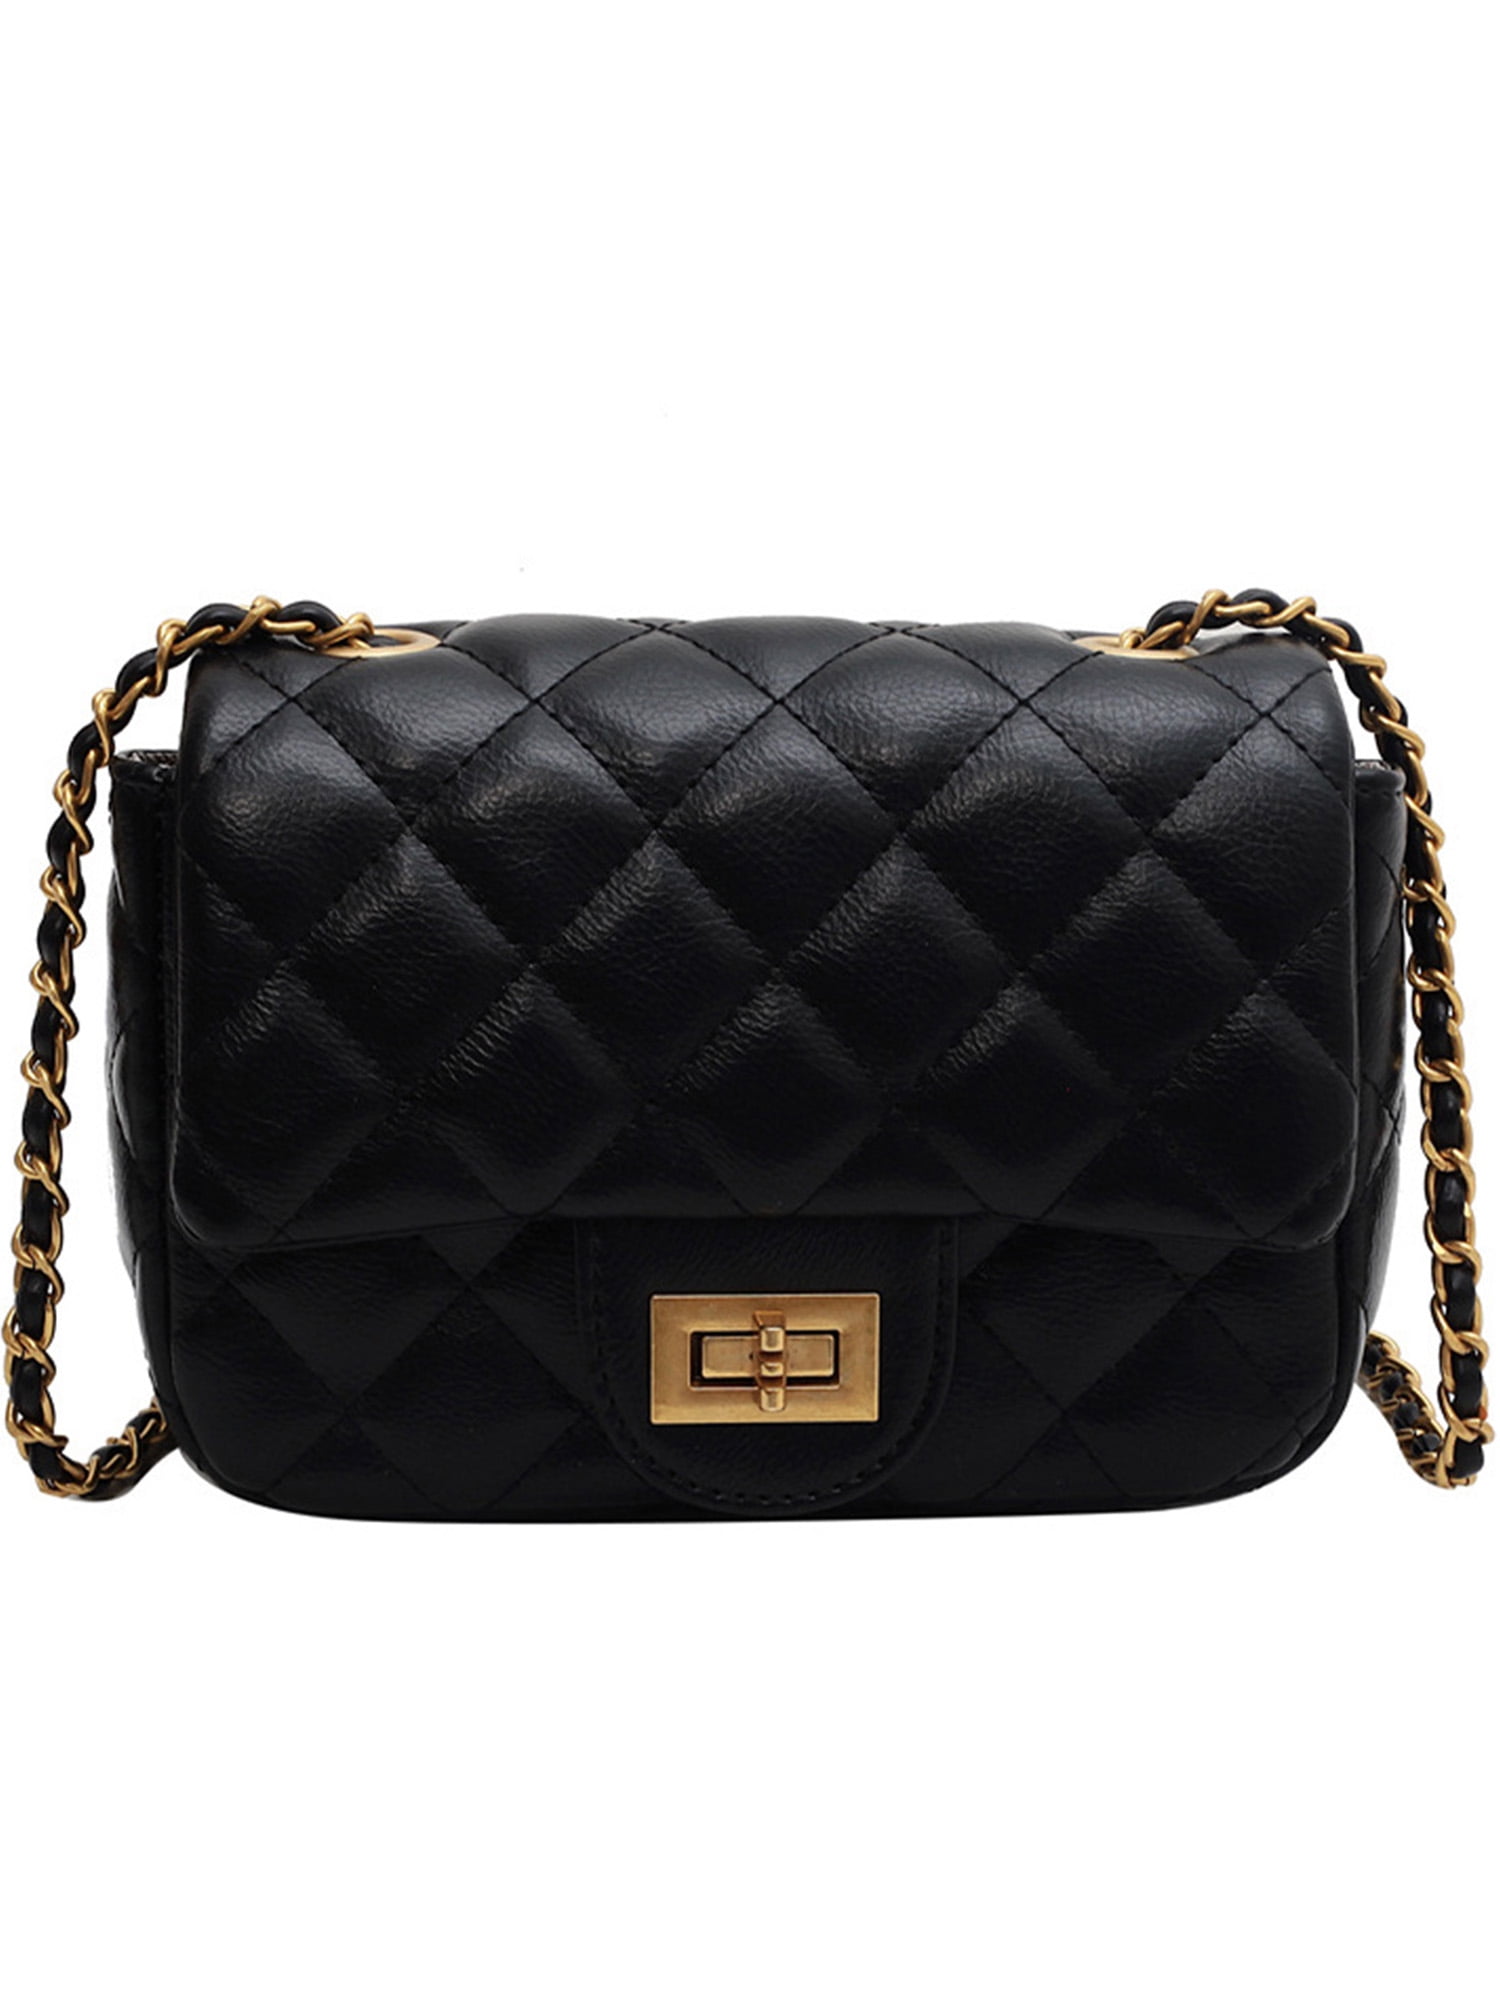 CHANEL Chic Pearls Flap Quilted Calfskin Leather Shoulder Bag Black